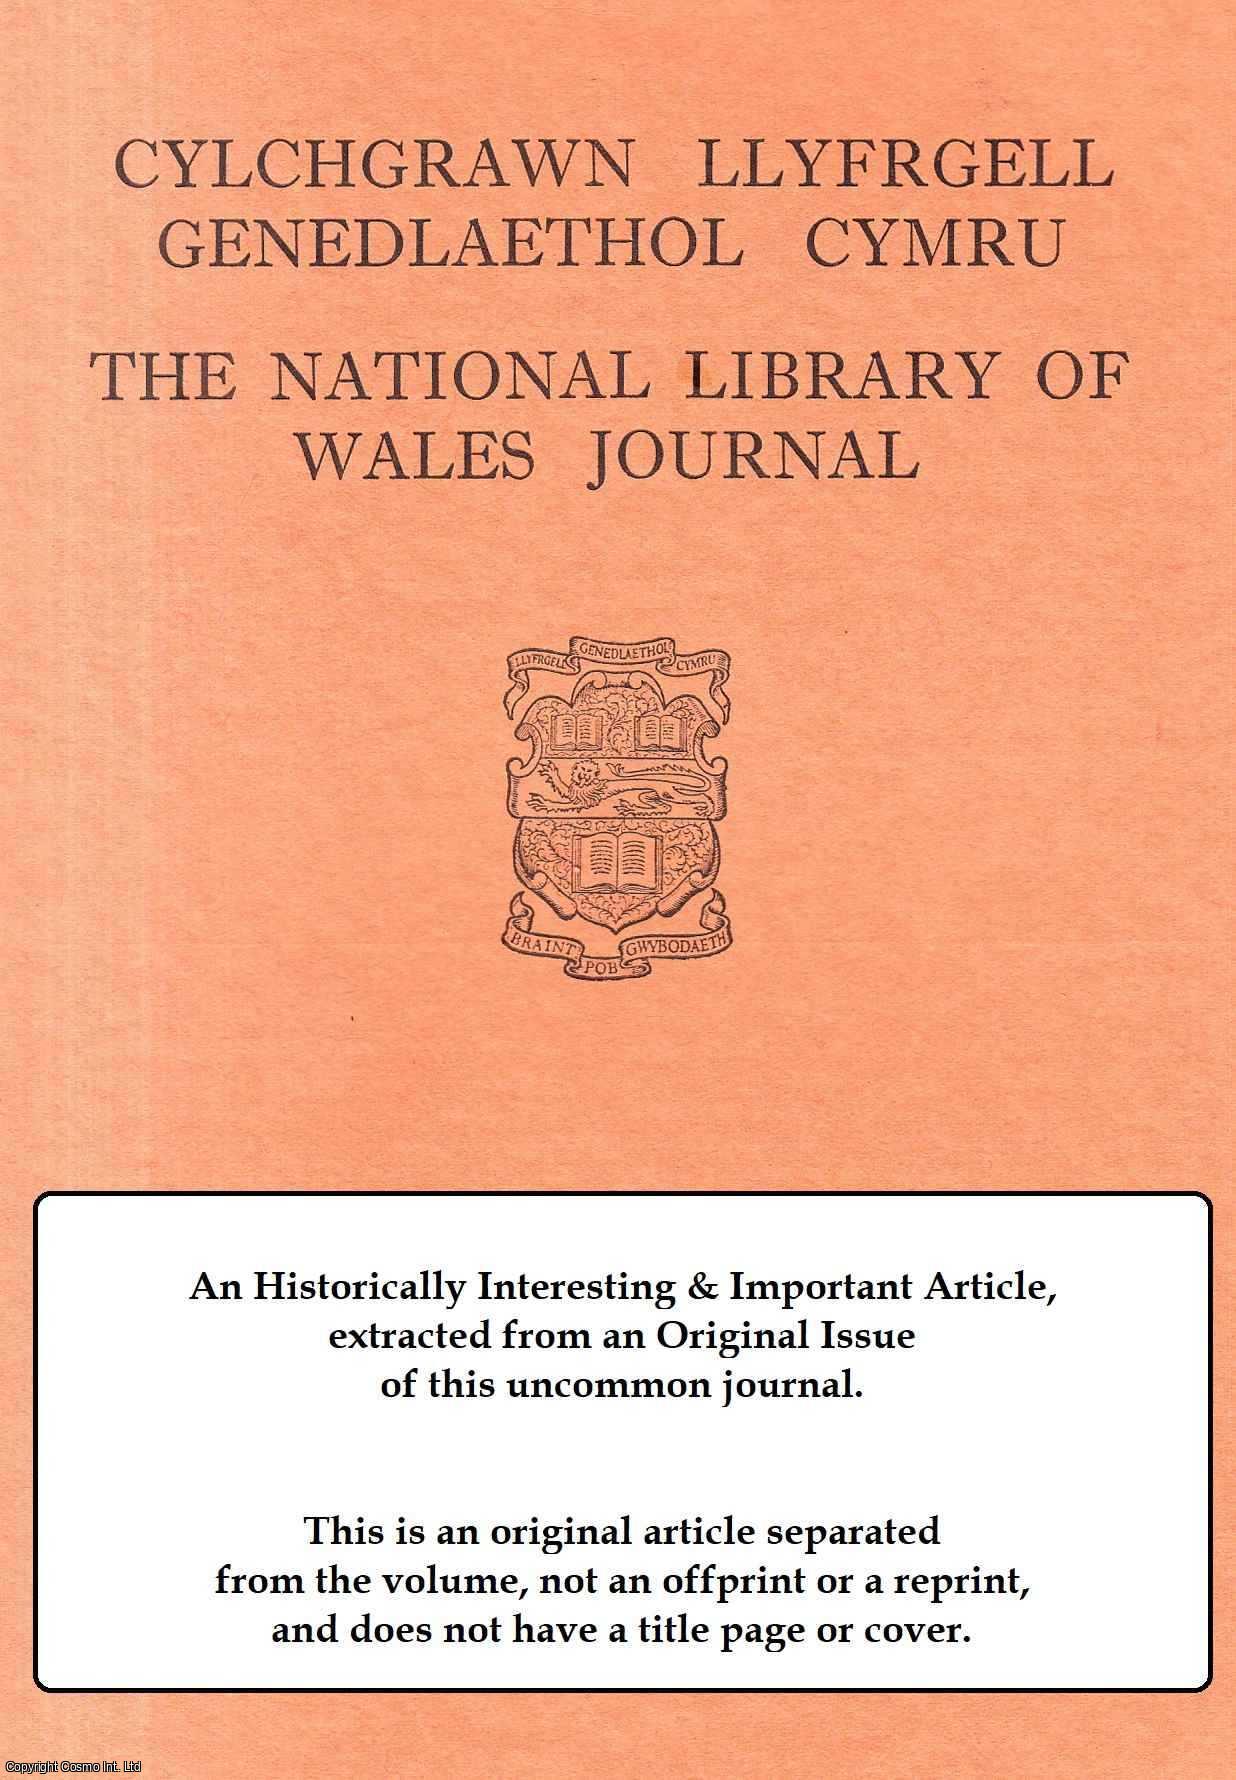 Ivor Atkins - The Authorship of The XVIth Century Description of St. Davids Printed in Browne Willis's Survey 1717. An original article from The National Library of Wales Journal, 1946.